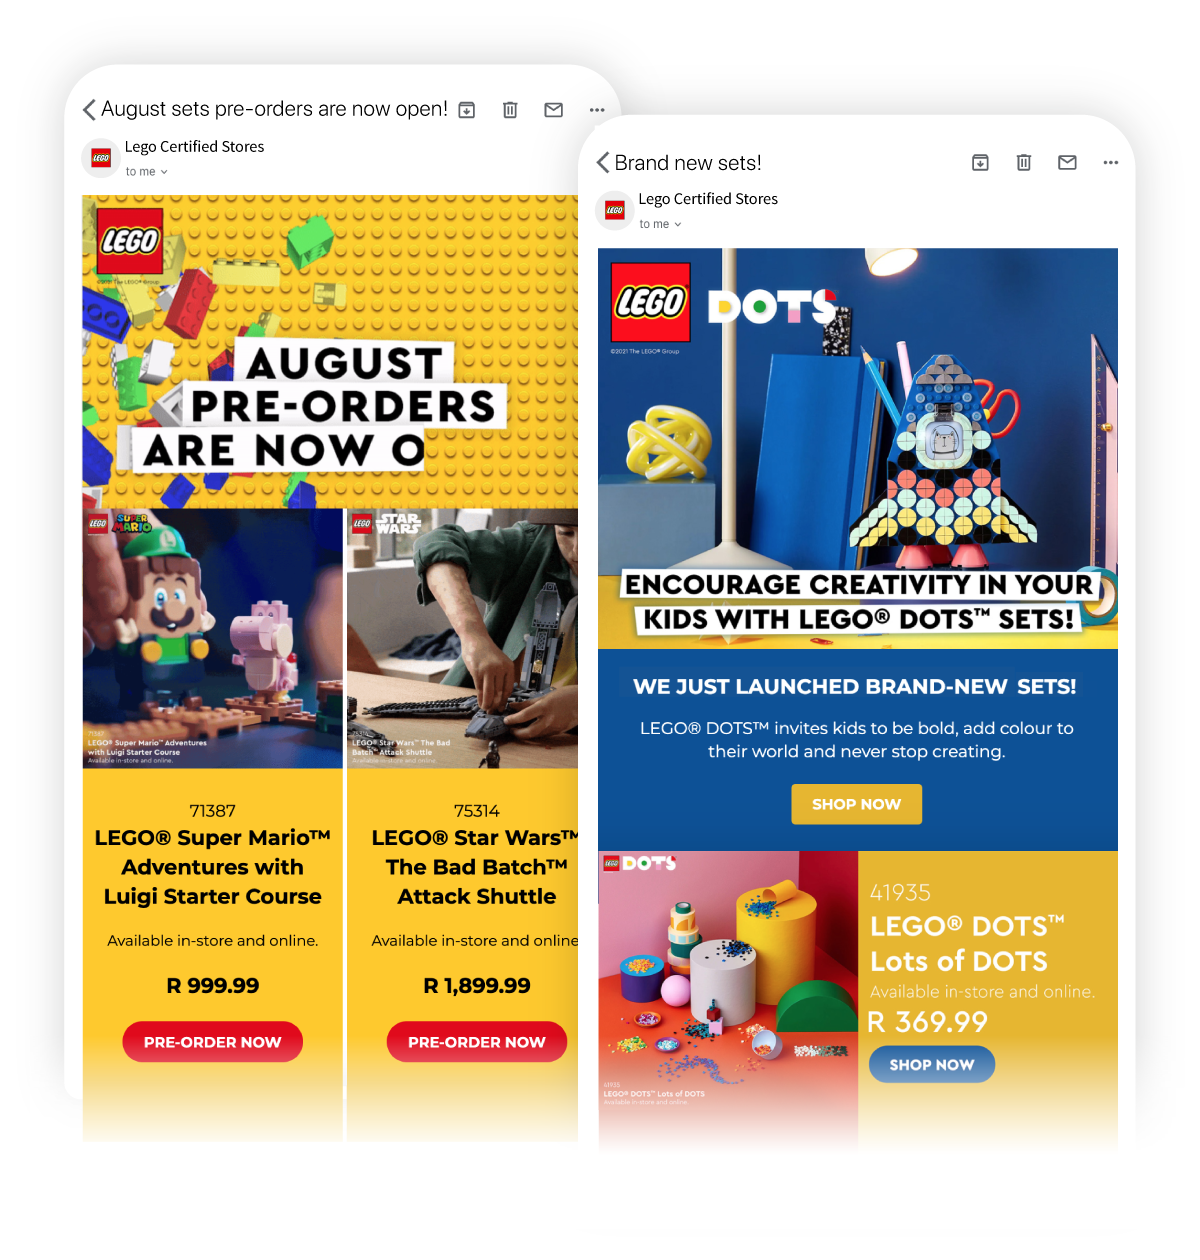 Lego pre-order and new set one-off email campaigns